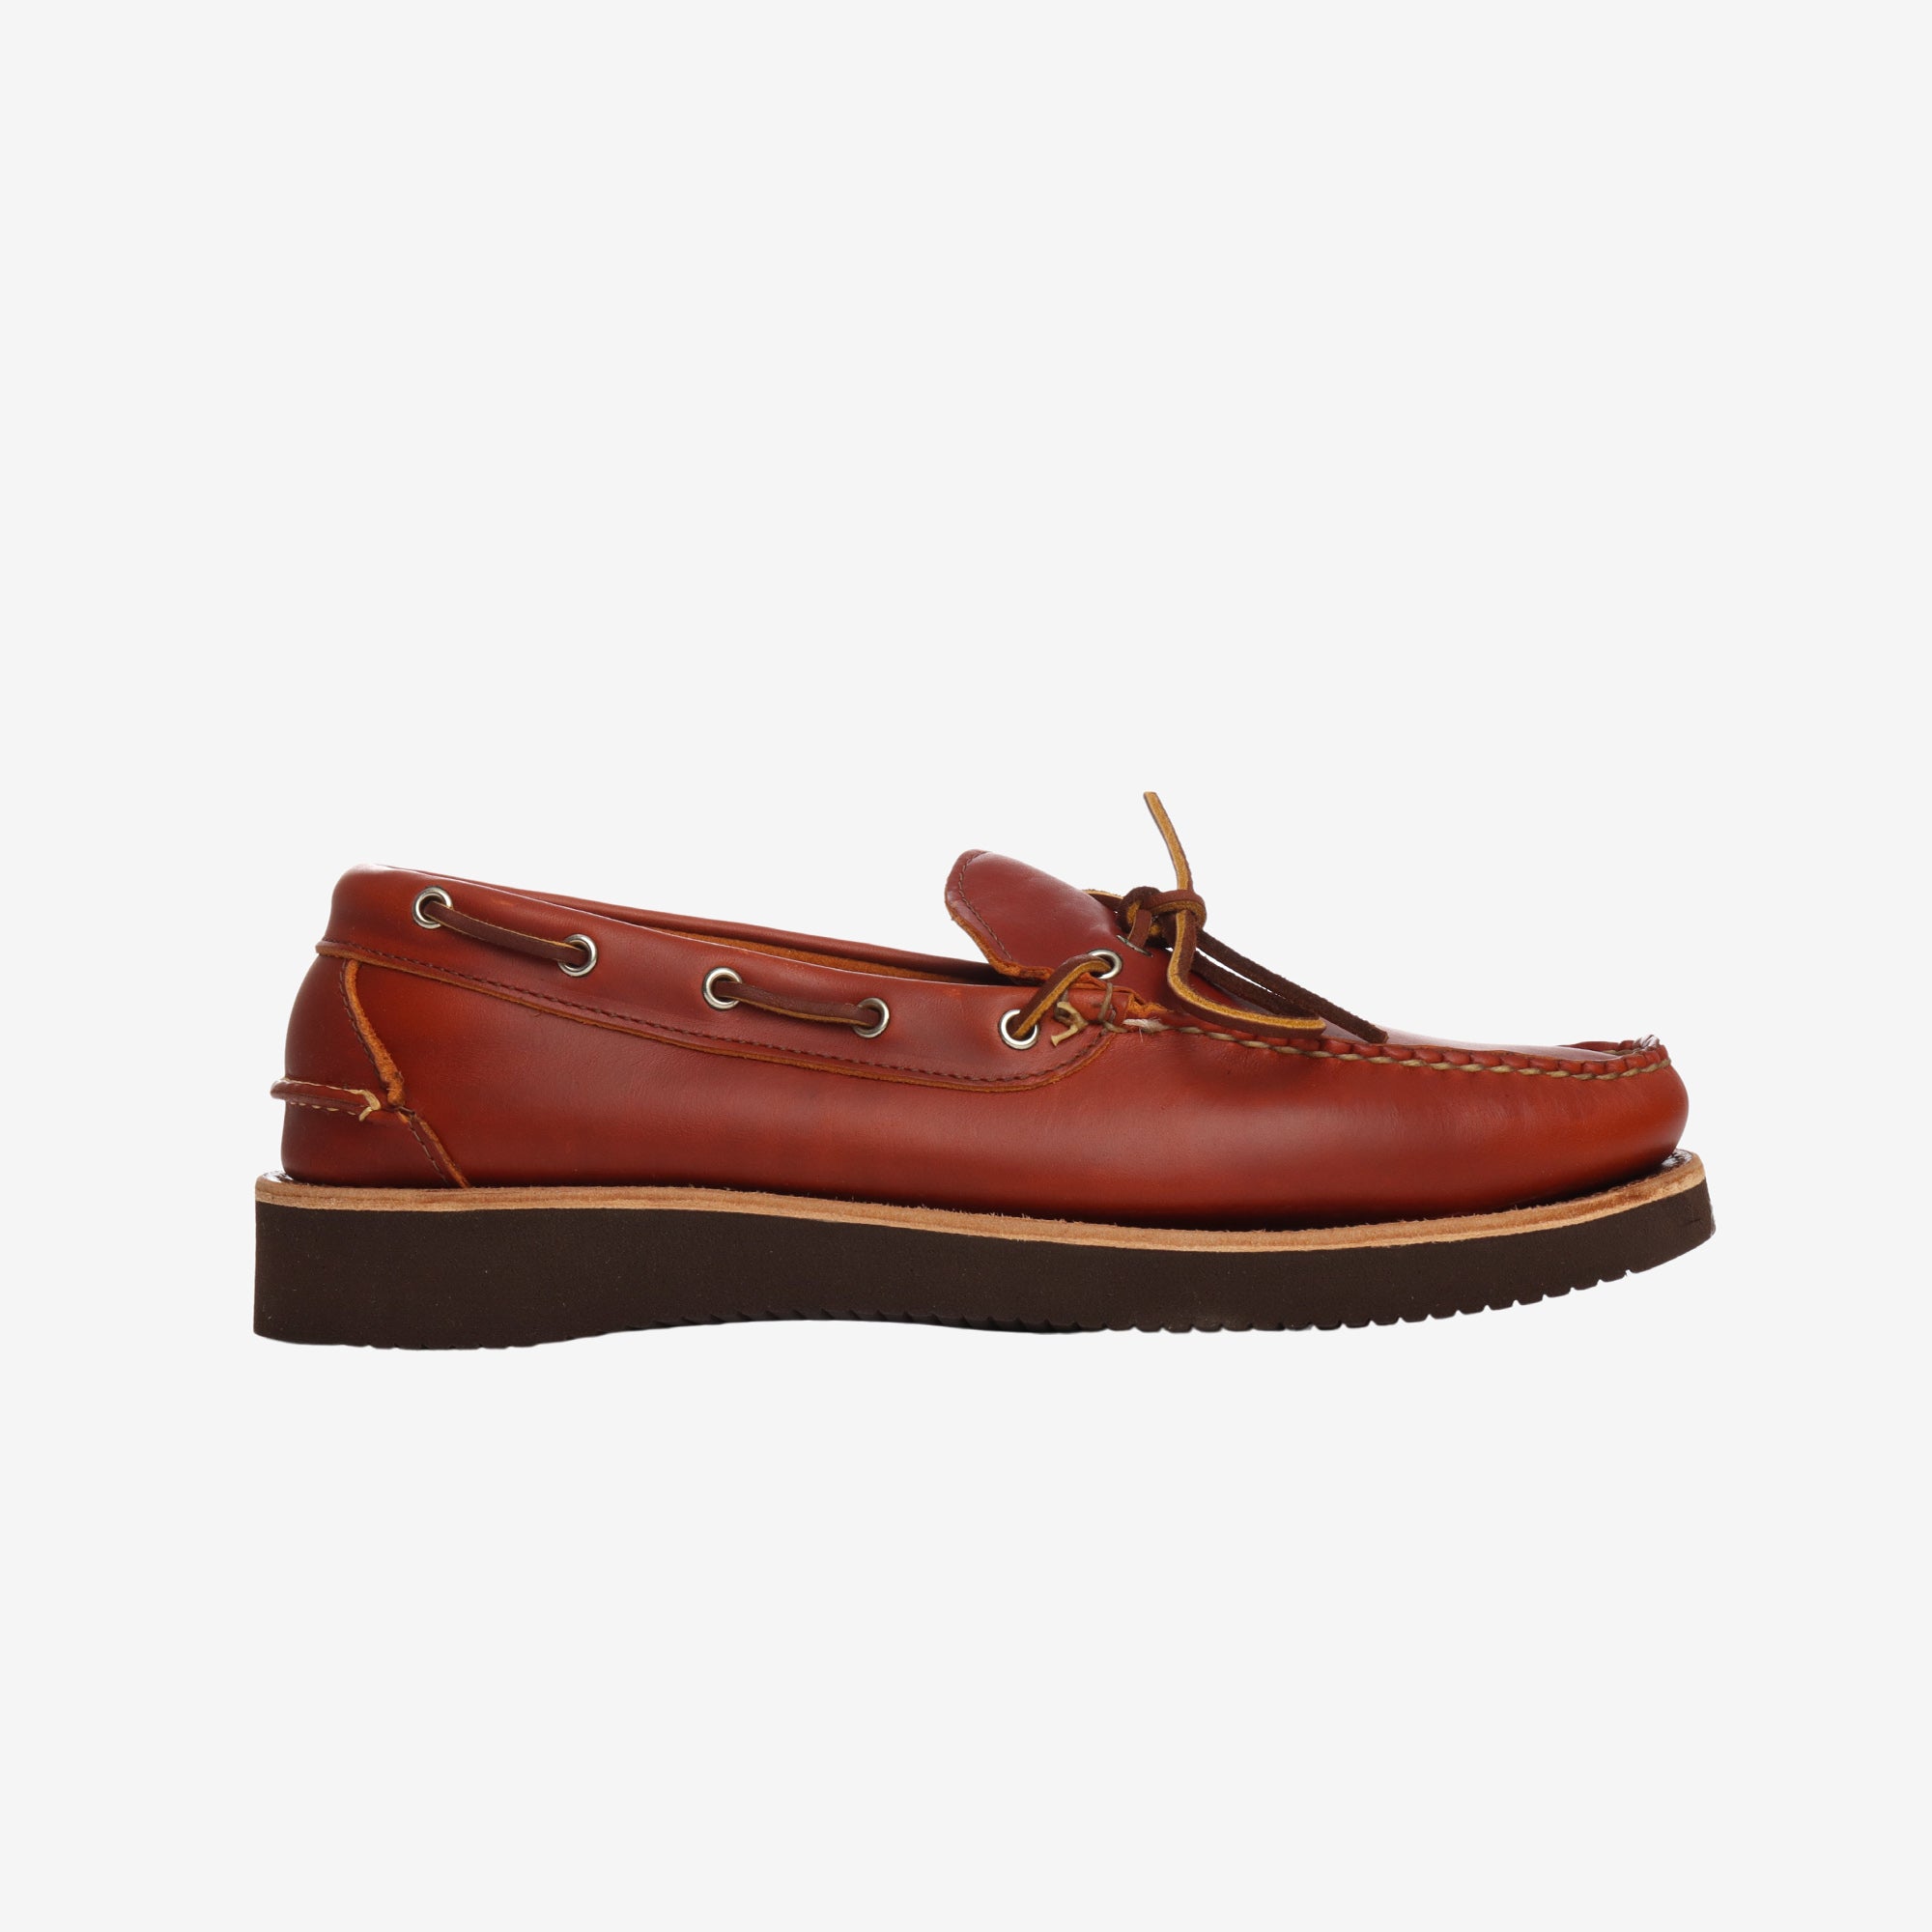 Moccasin Boat Shoes